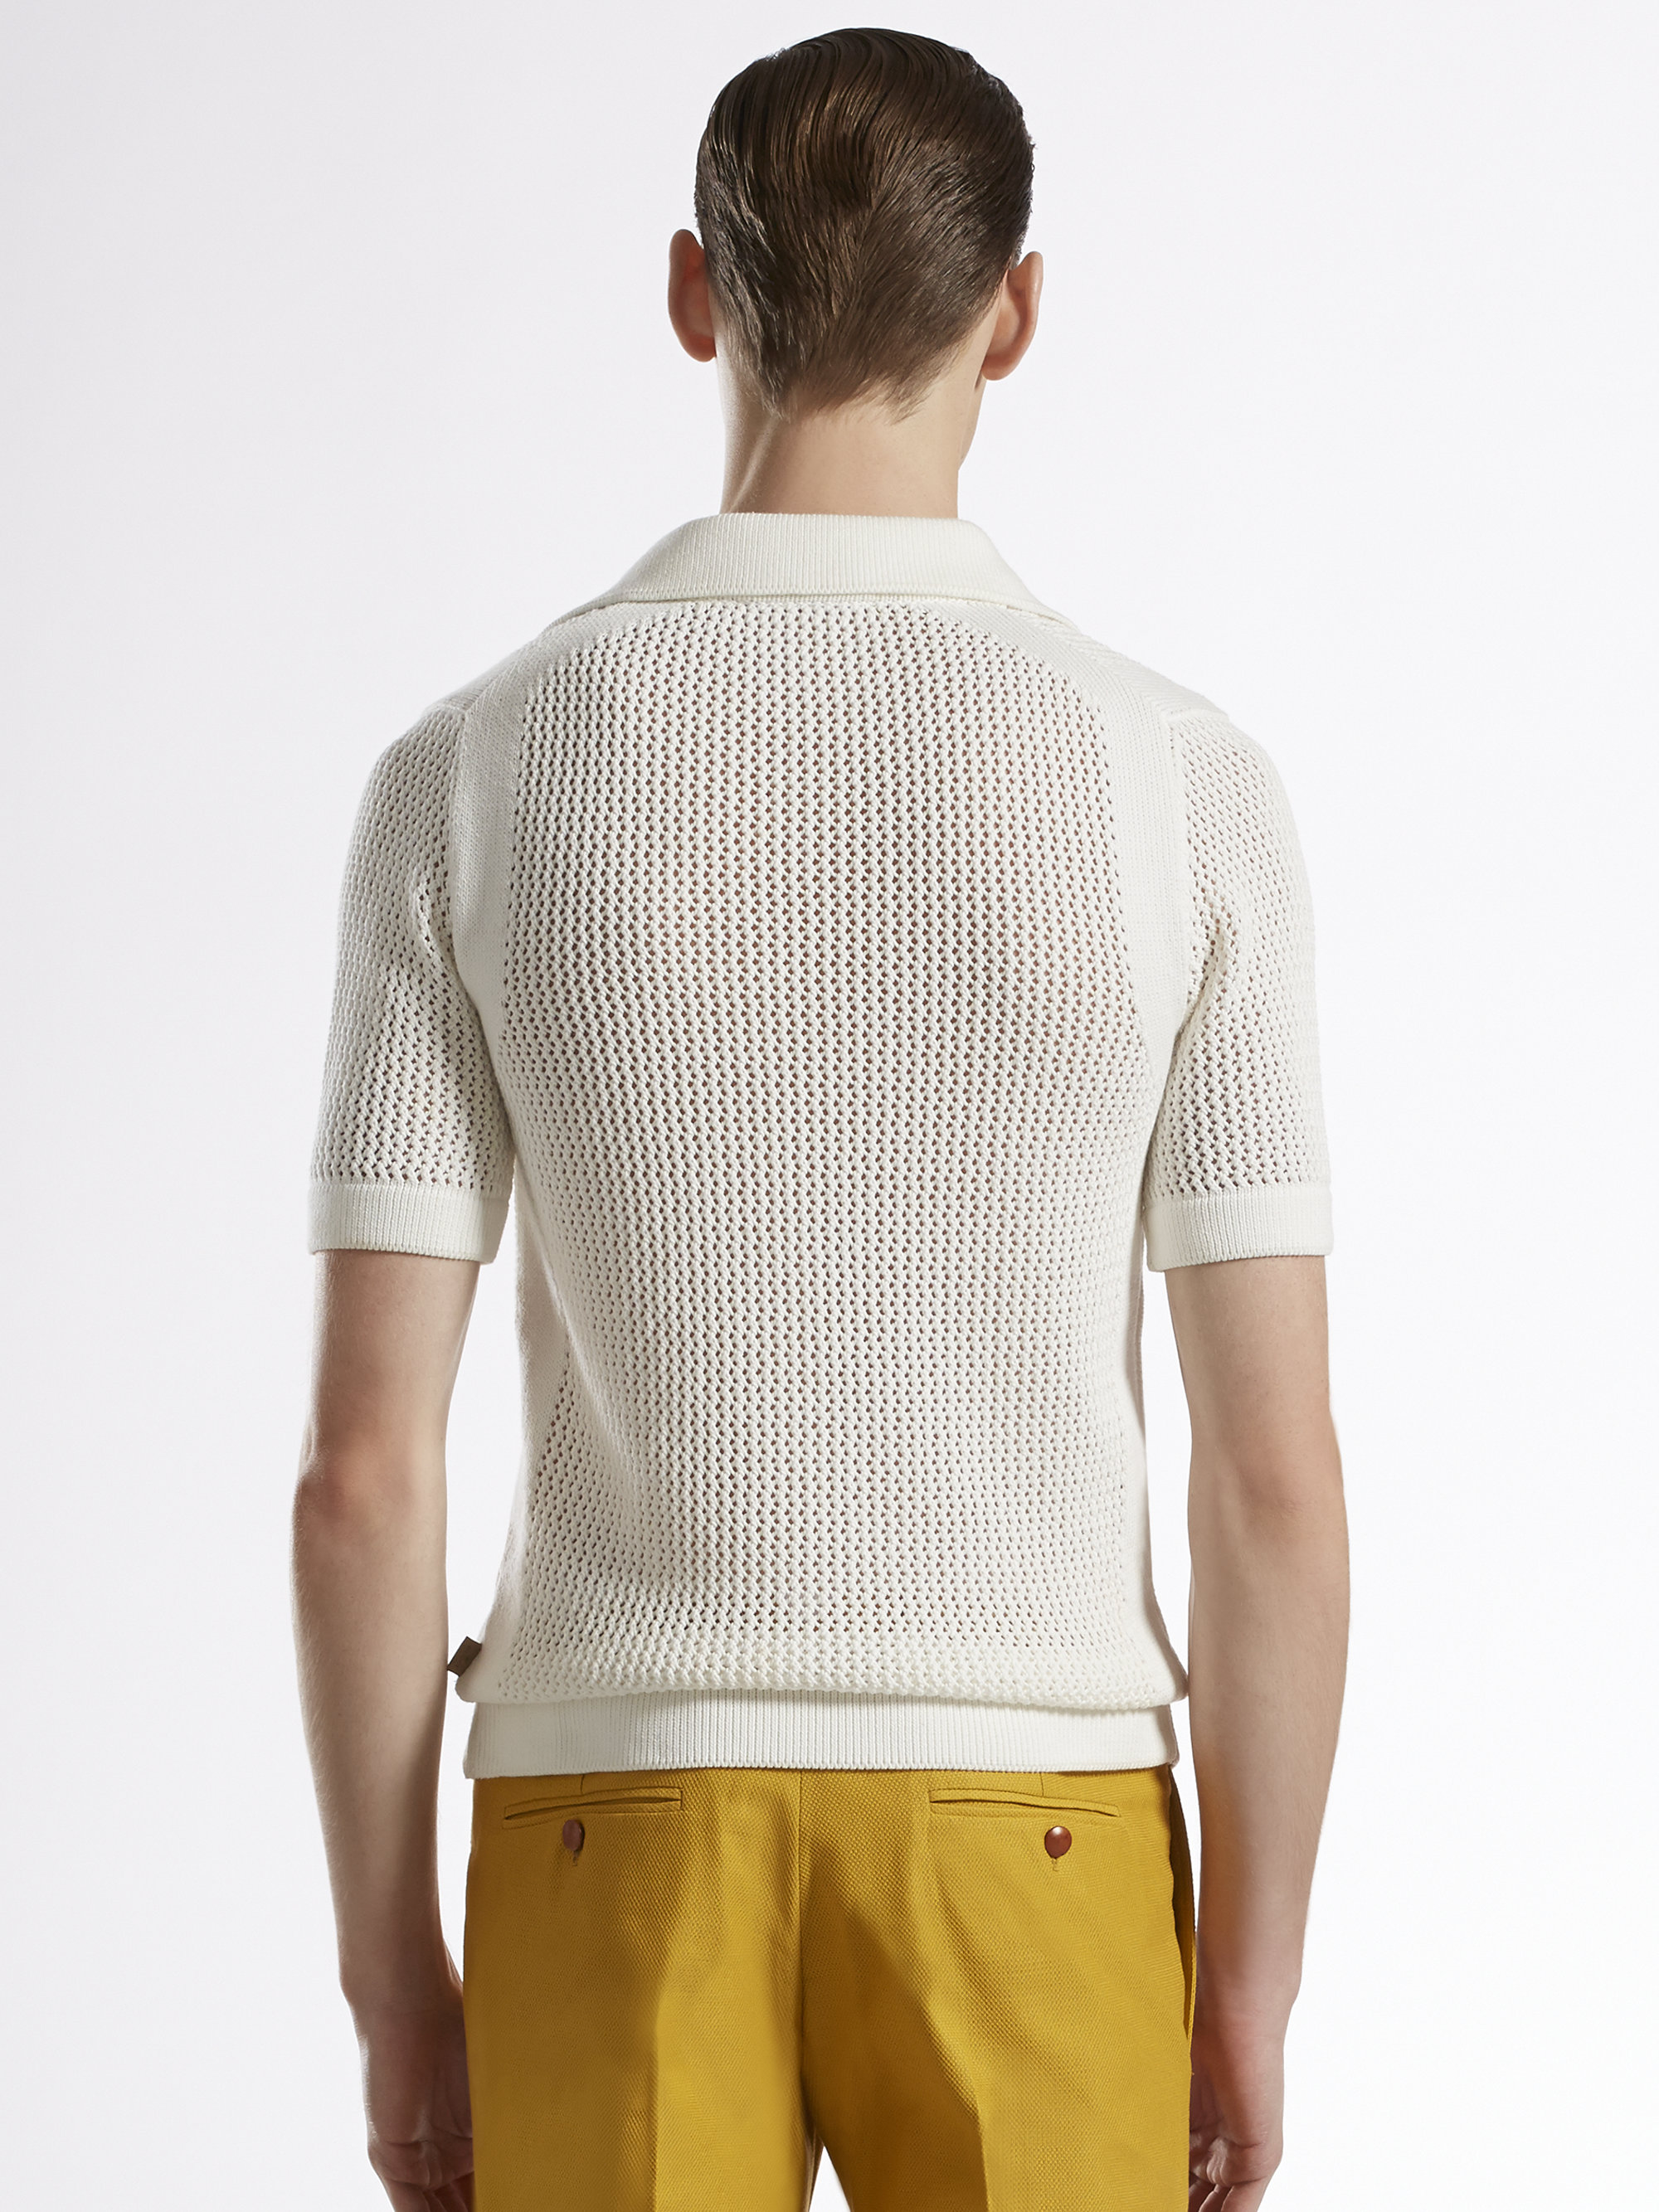 Gucci Cotton Mesh Knit Polo in White for Men - Lyst